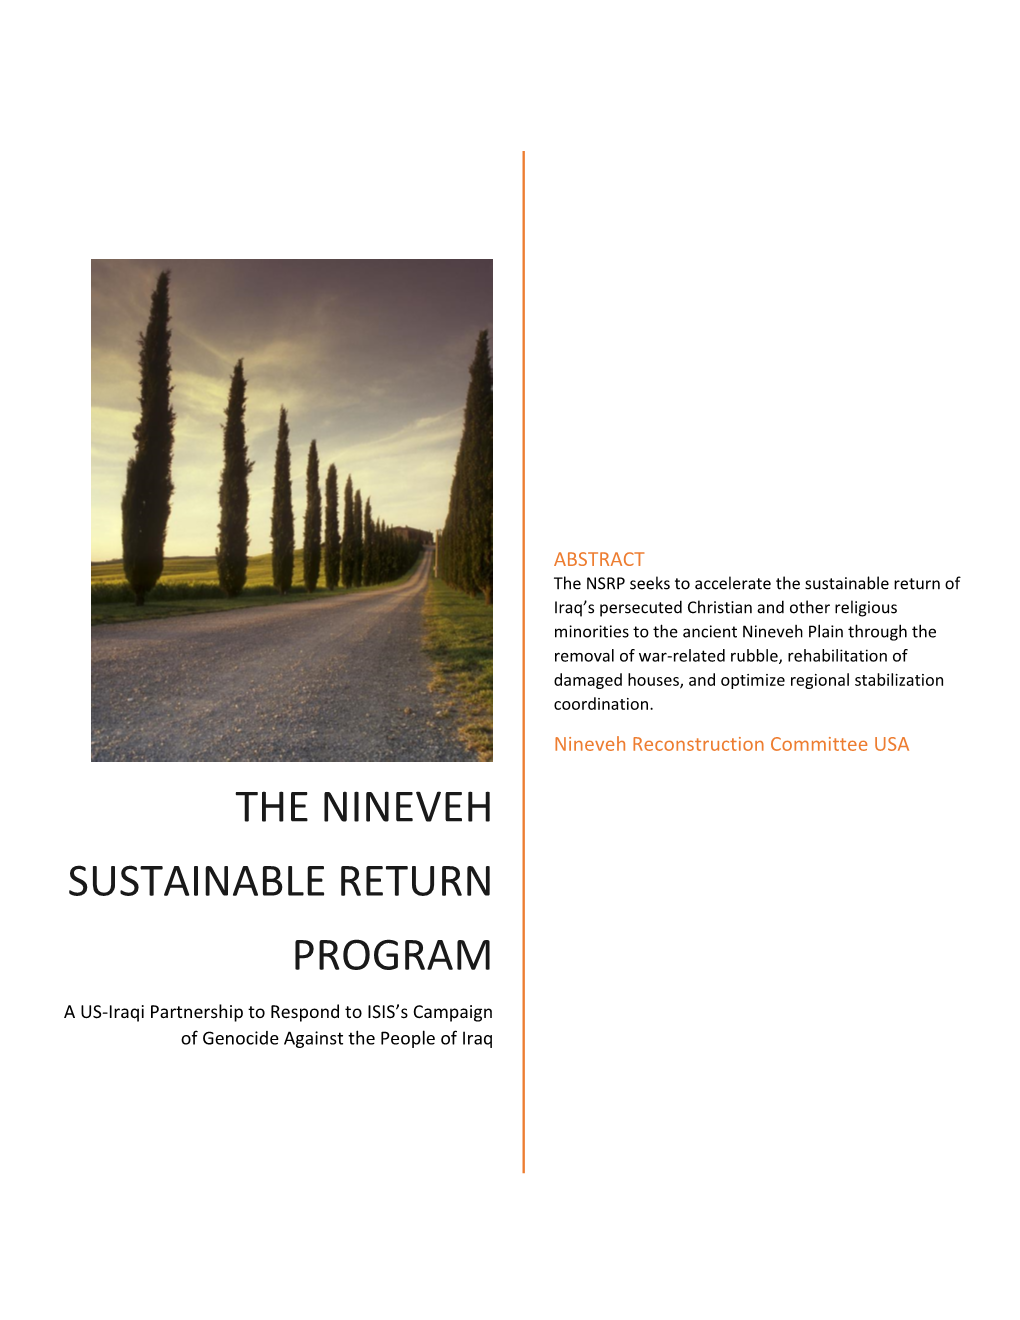 THE NINEVEH SUSTAINABLE RETURN PROGRAM a US-Iraqi Partnership to Respond to ISIS’S Campaign of Genocide Against the People of Iraq